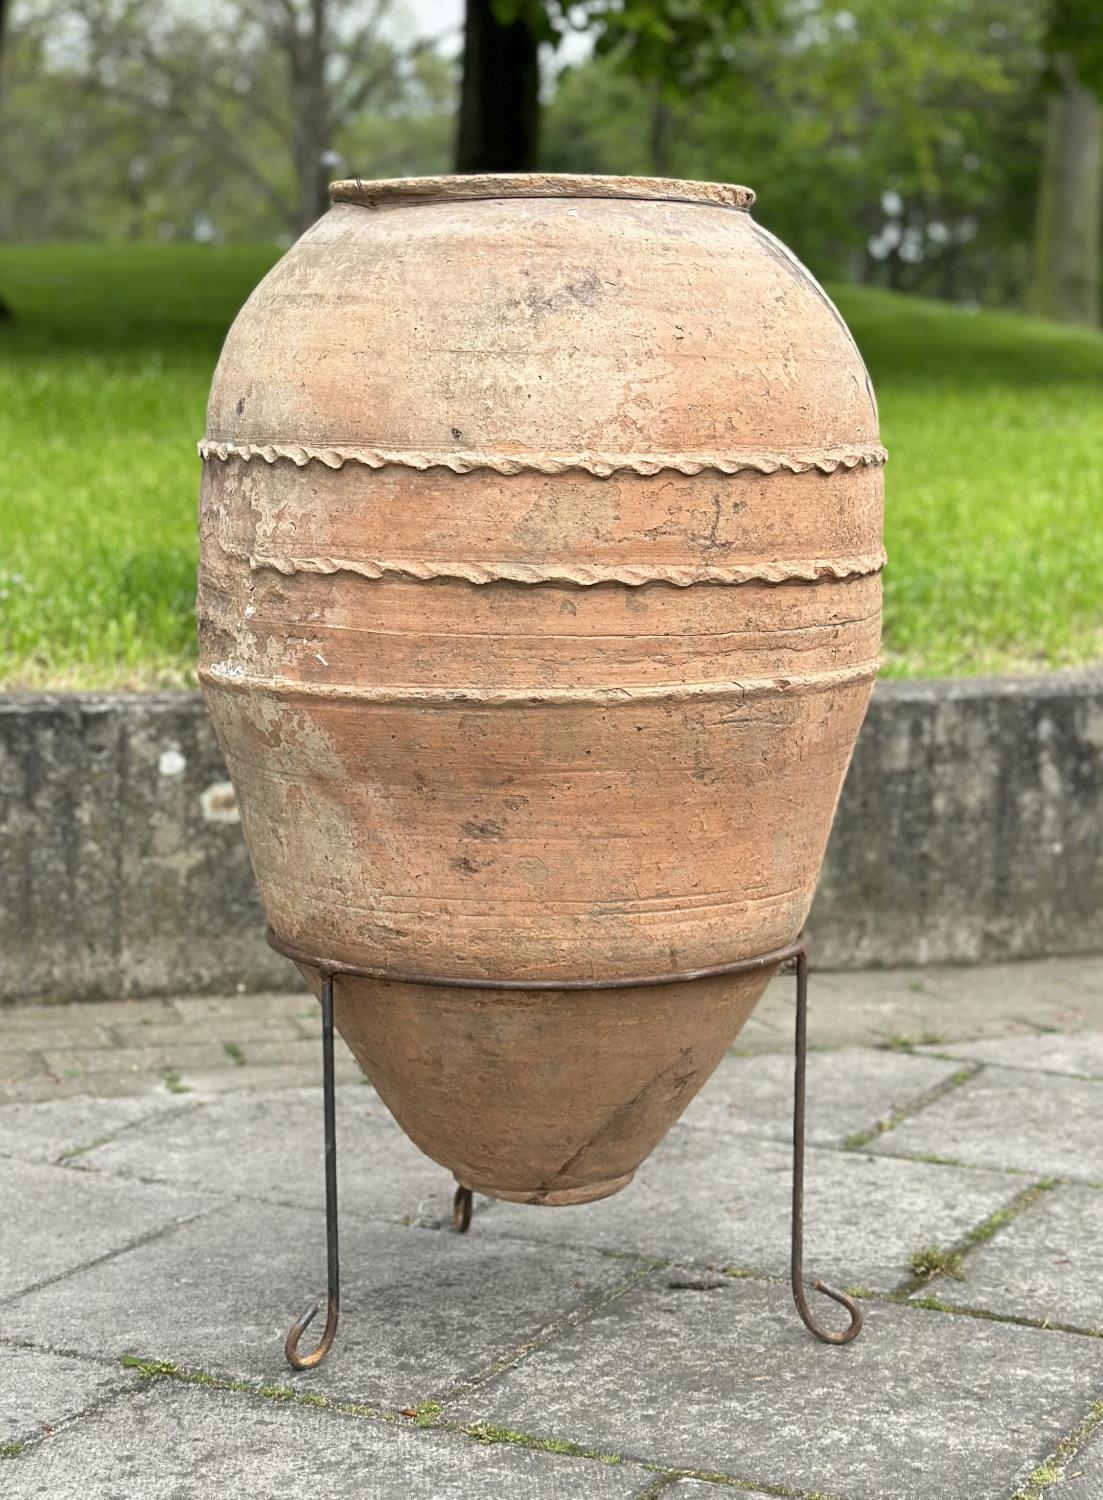 GARDEN OLIVE STYLE JAR PLANTER, well weathered terracotta, with pressed banded detail raised on